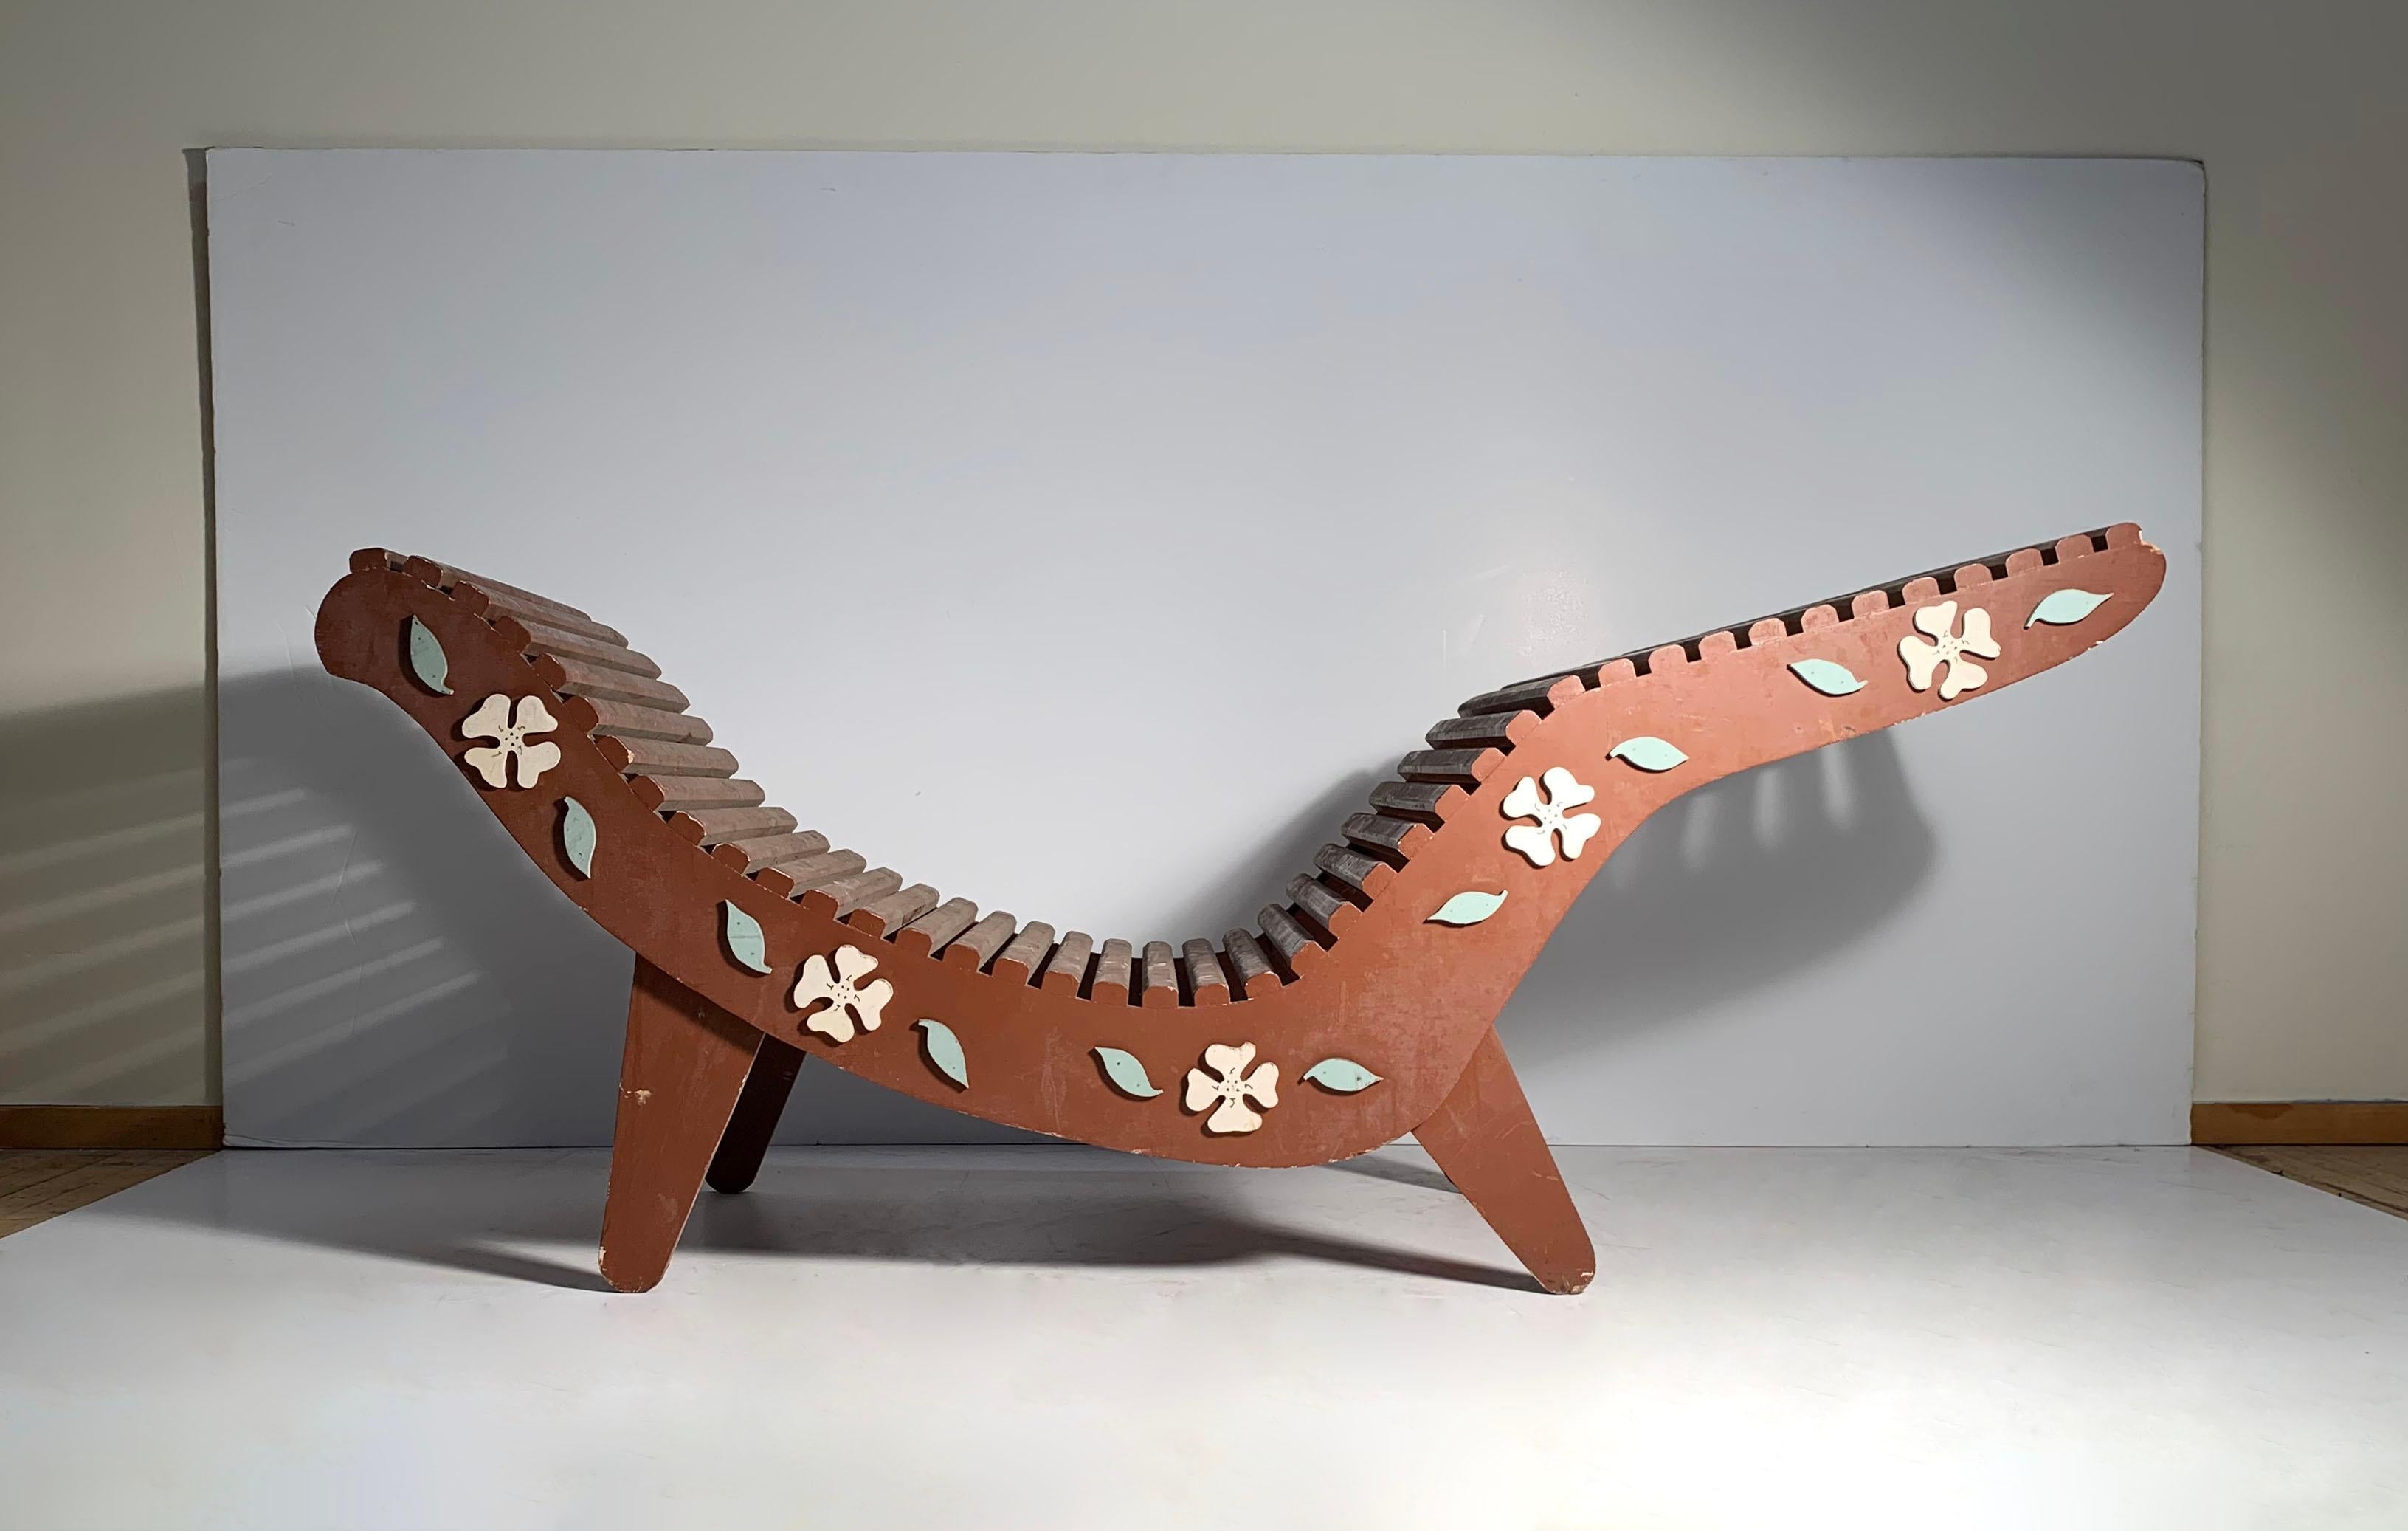 Vintage Klaus Grabe chaise lounge Model C5. USA, 1950. Stained plywood. 

This is the first Klaus Grabe we have come across with hand cut wood organic design floral appliqués attached to the sides. They are easily removable if one desires to not